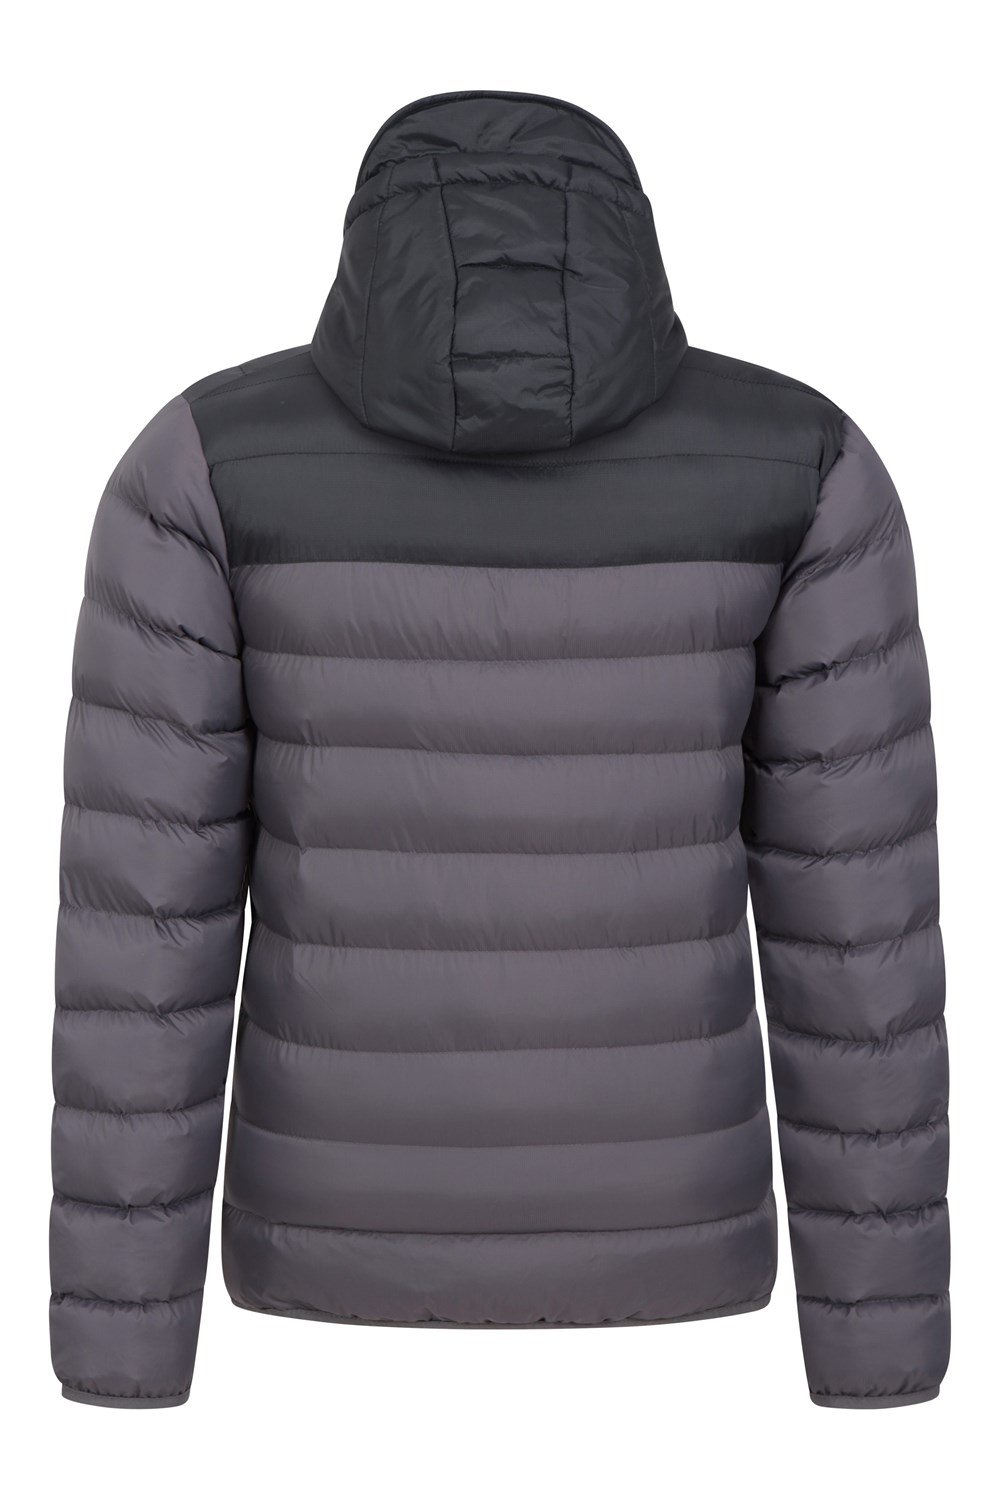 Mountain Warehouse Mens Padded Winter Jacket Water-resistant ...